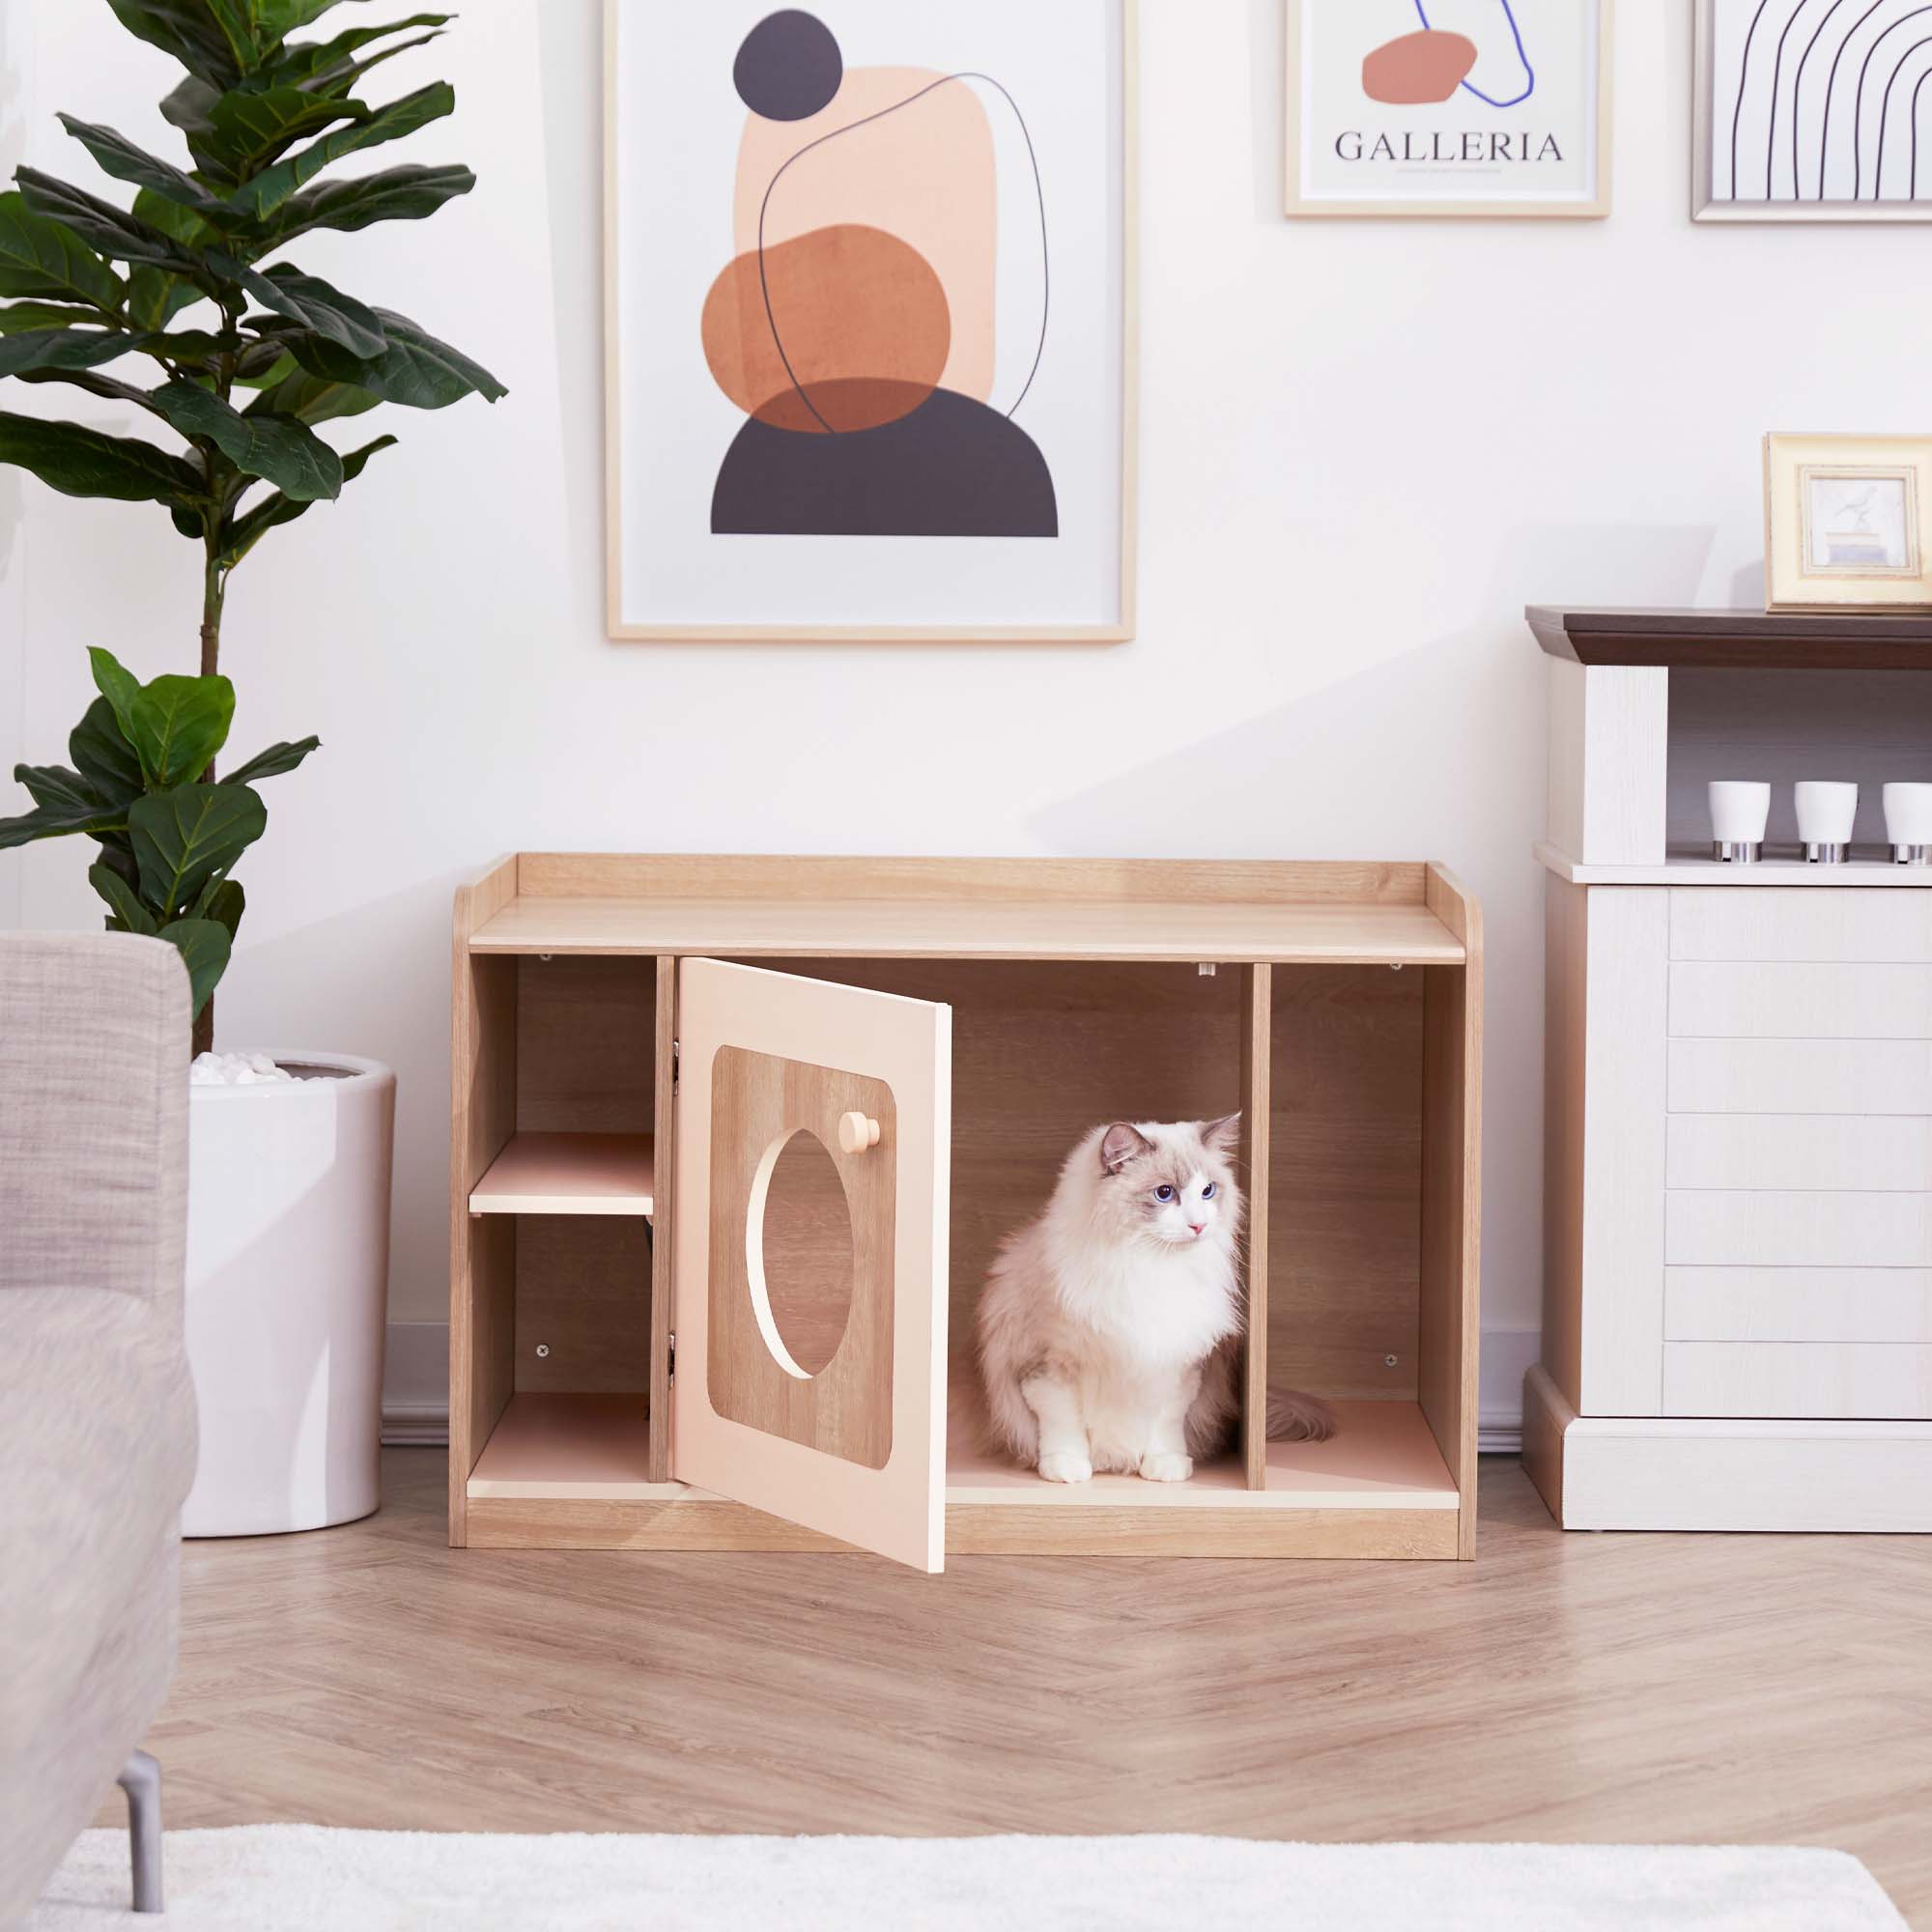 A fluffy cat sits at the door of a litter box enclosure side table with storage